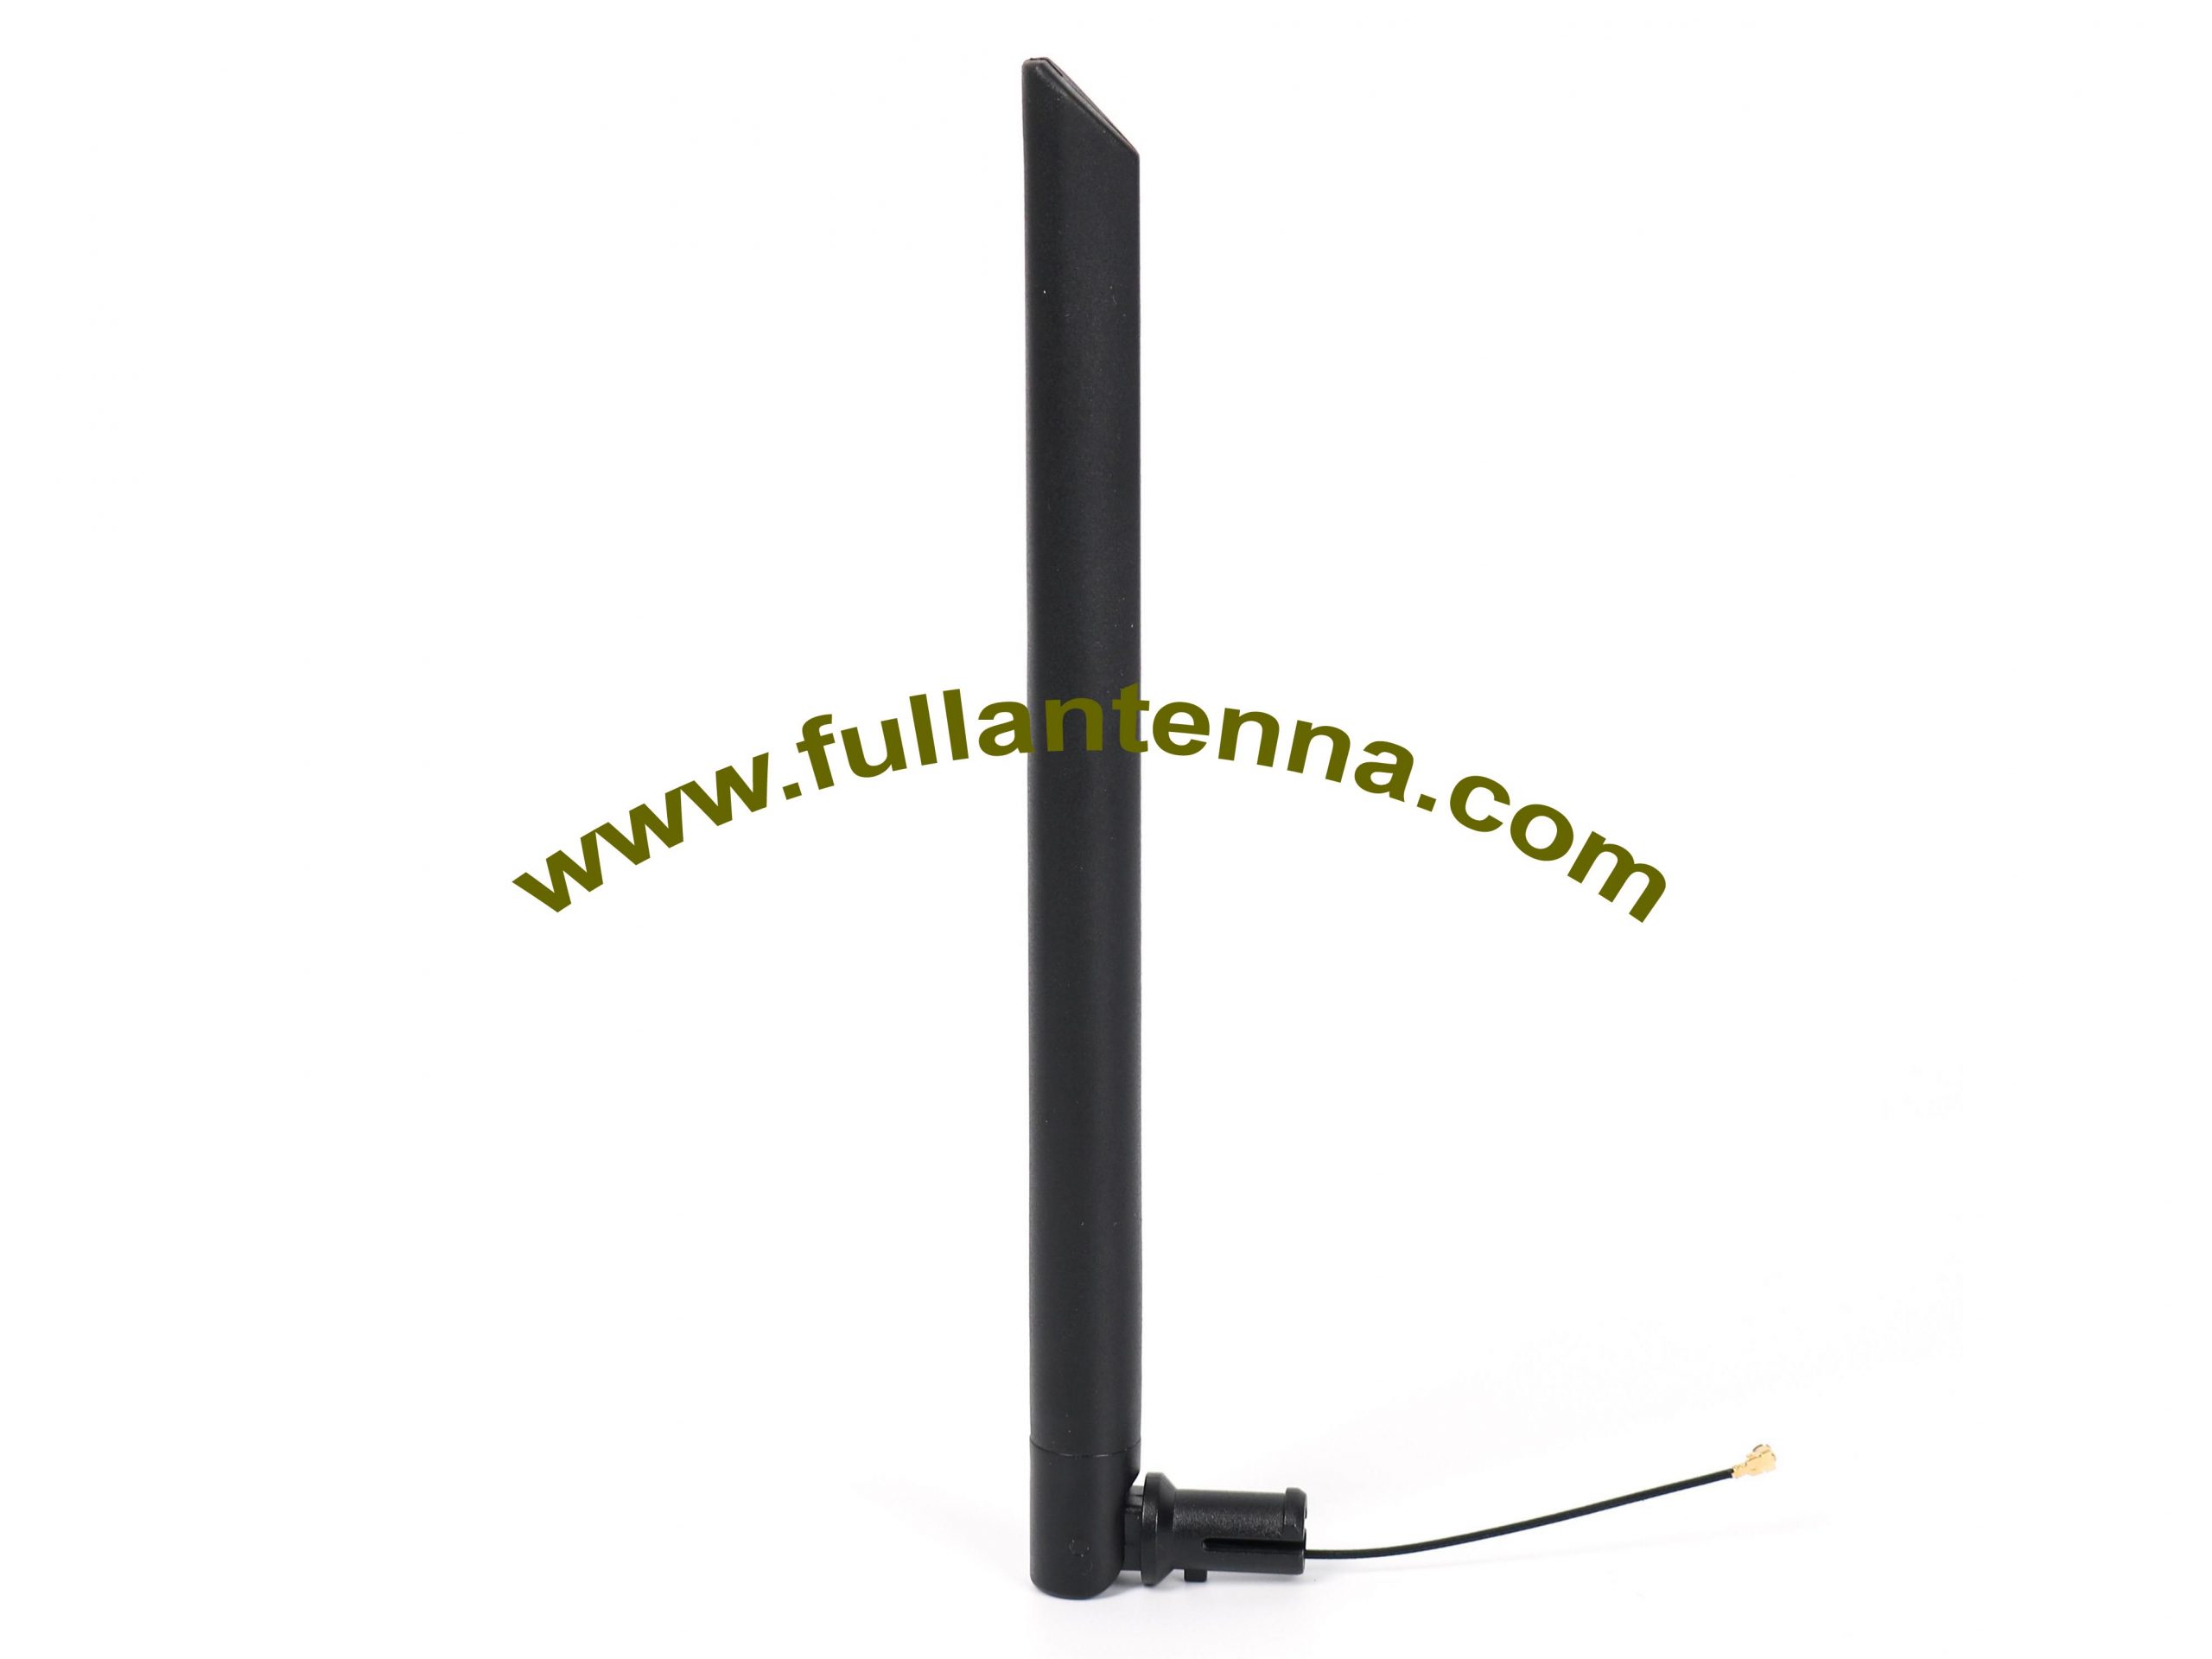 P/N:FALTE.0204,4G/LTE Rubber Antenna,4g antenna with cable  IPEX or U.FL  5dBi gain